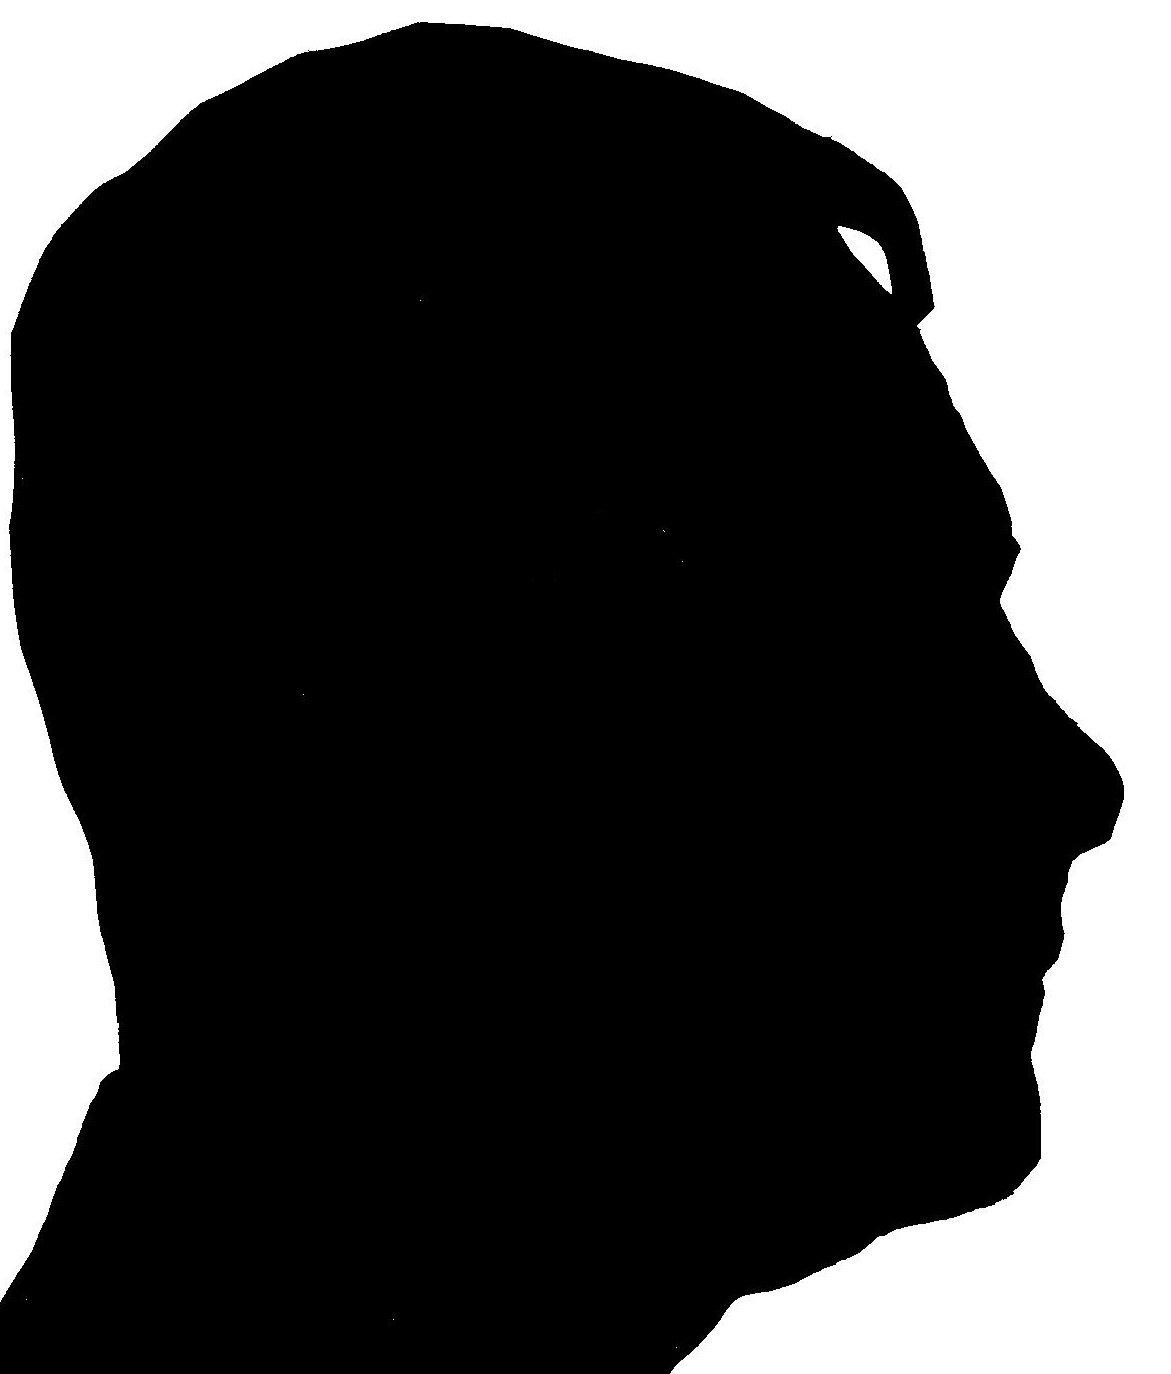 Playing with shadows: silhouette portraits and how to make them 